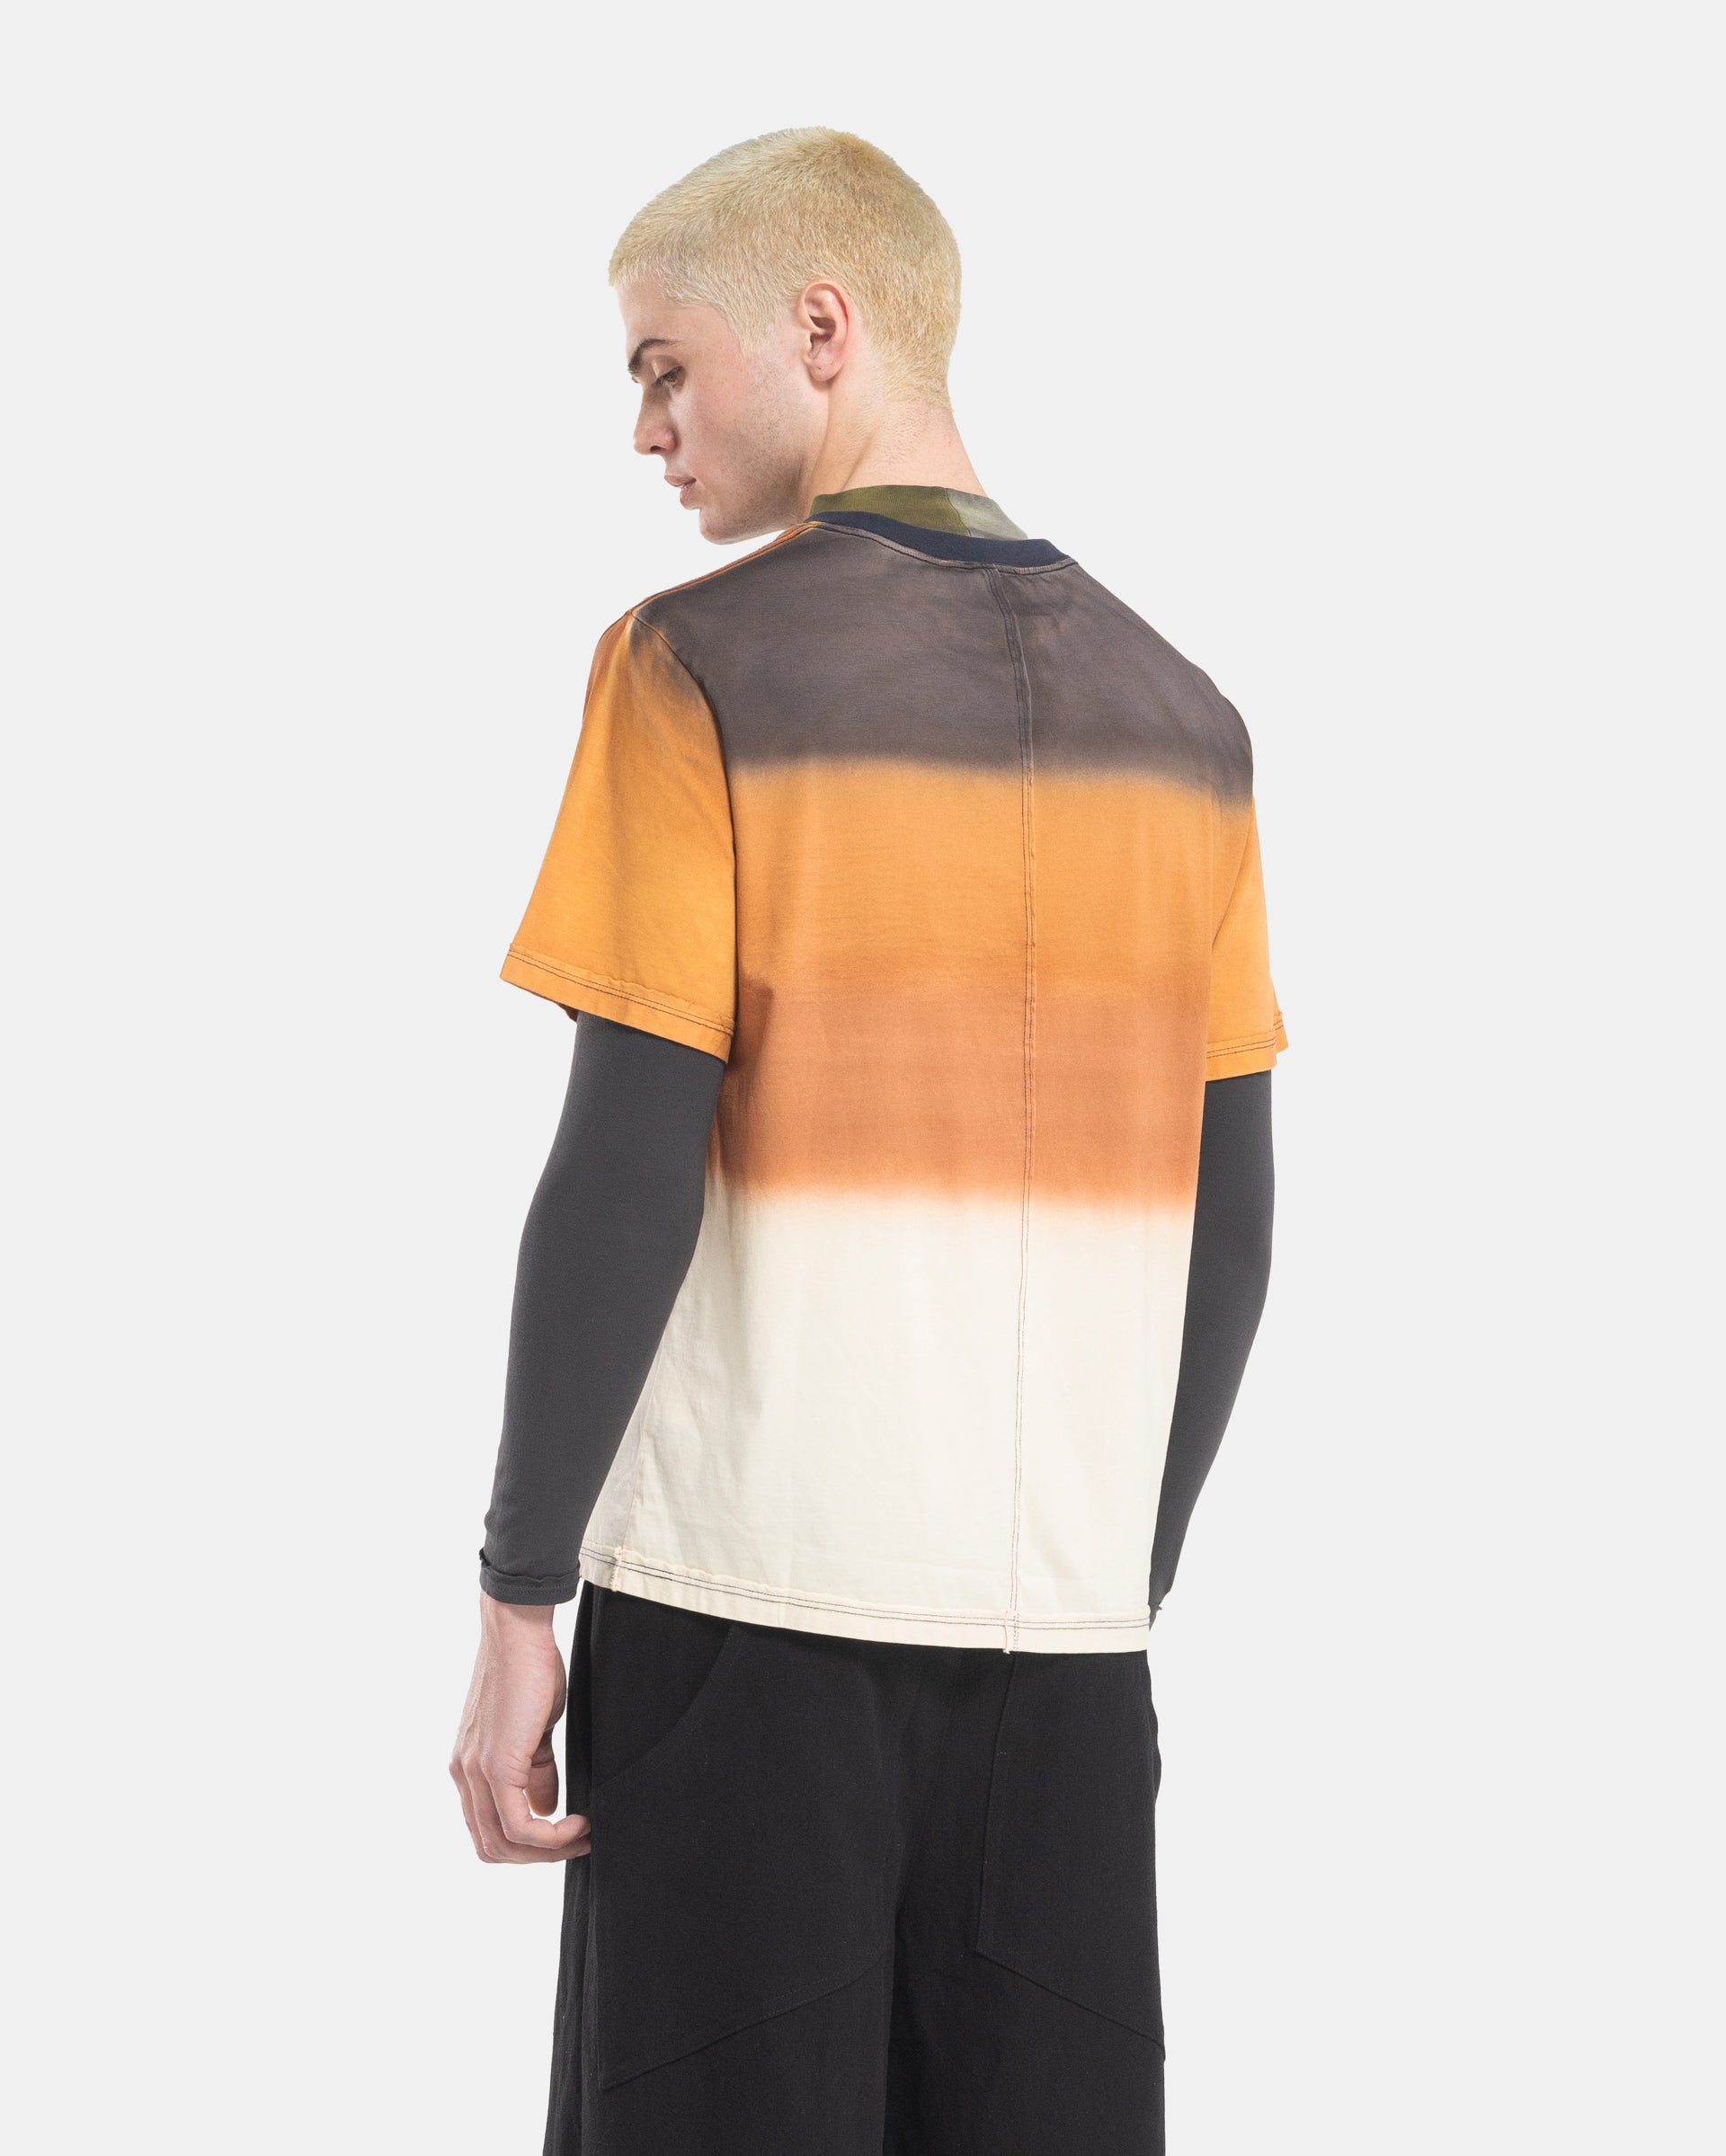 Male Model wearing the Eckhaus Latta Lapped Designer T-Shirt with a printed design